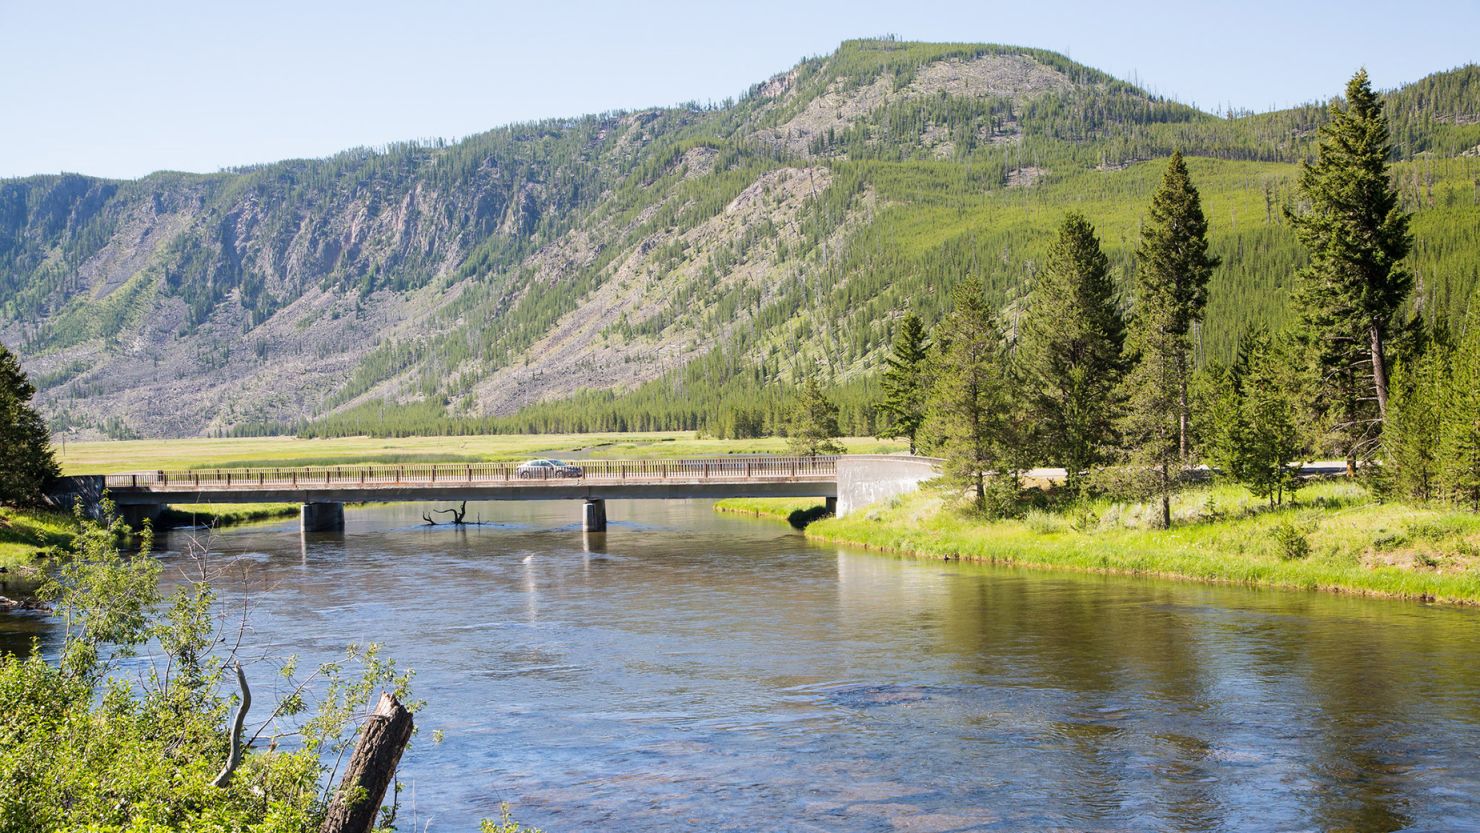 The incident reported by the National Park Service occurred on the West Entrance Road near the Seven Mile Bridge (pictured) in Yellowstone National Park.